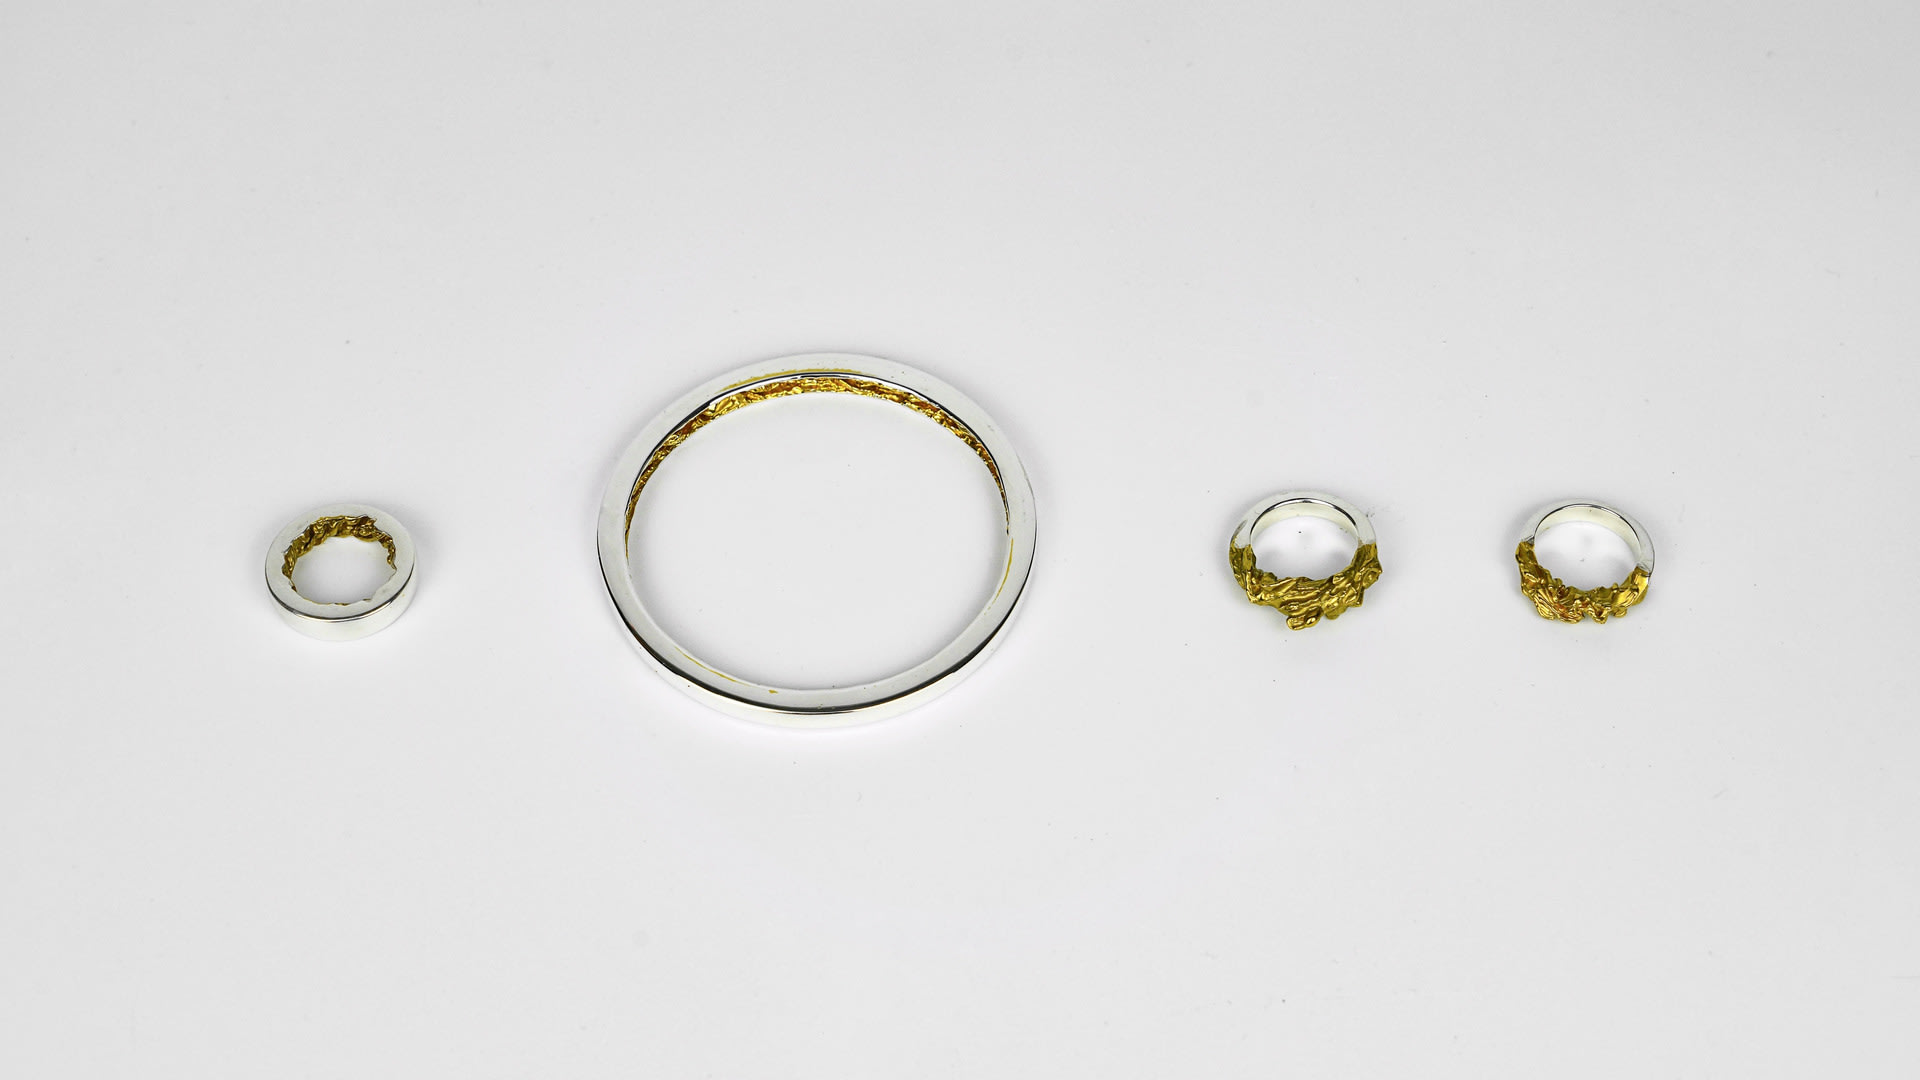 Half of the piece is a basic polished ring and bangle, the other half is gilded section carved in the form of a water wave.